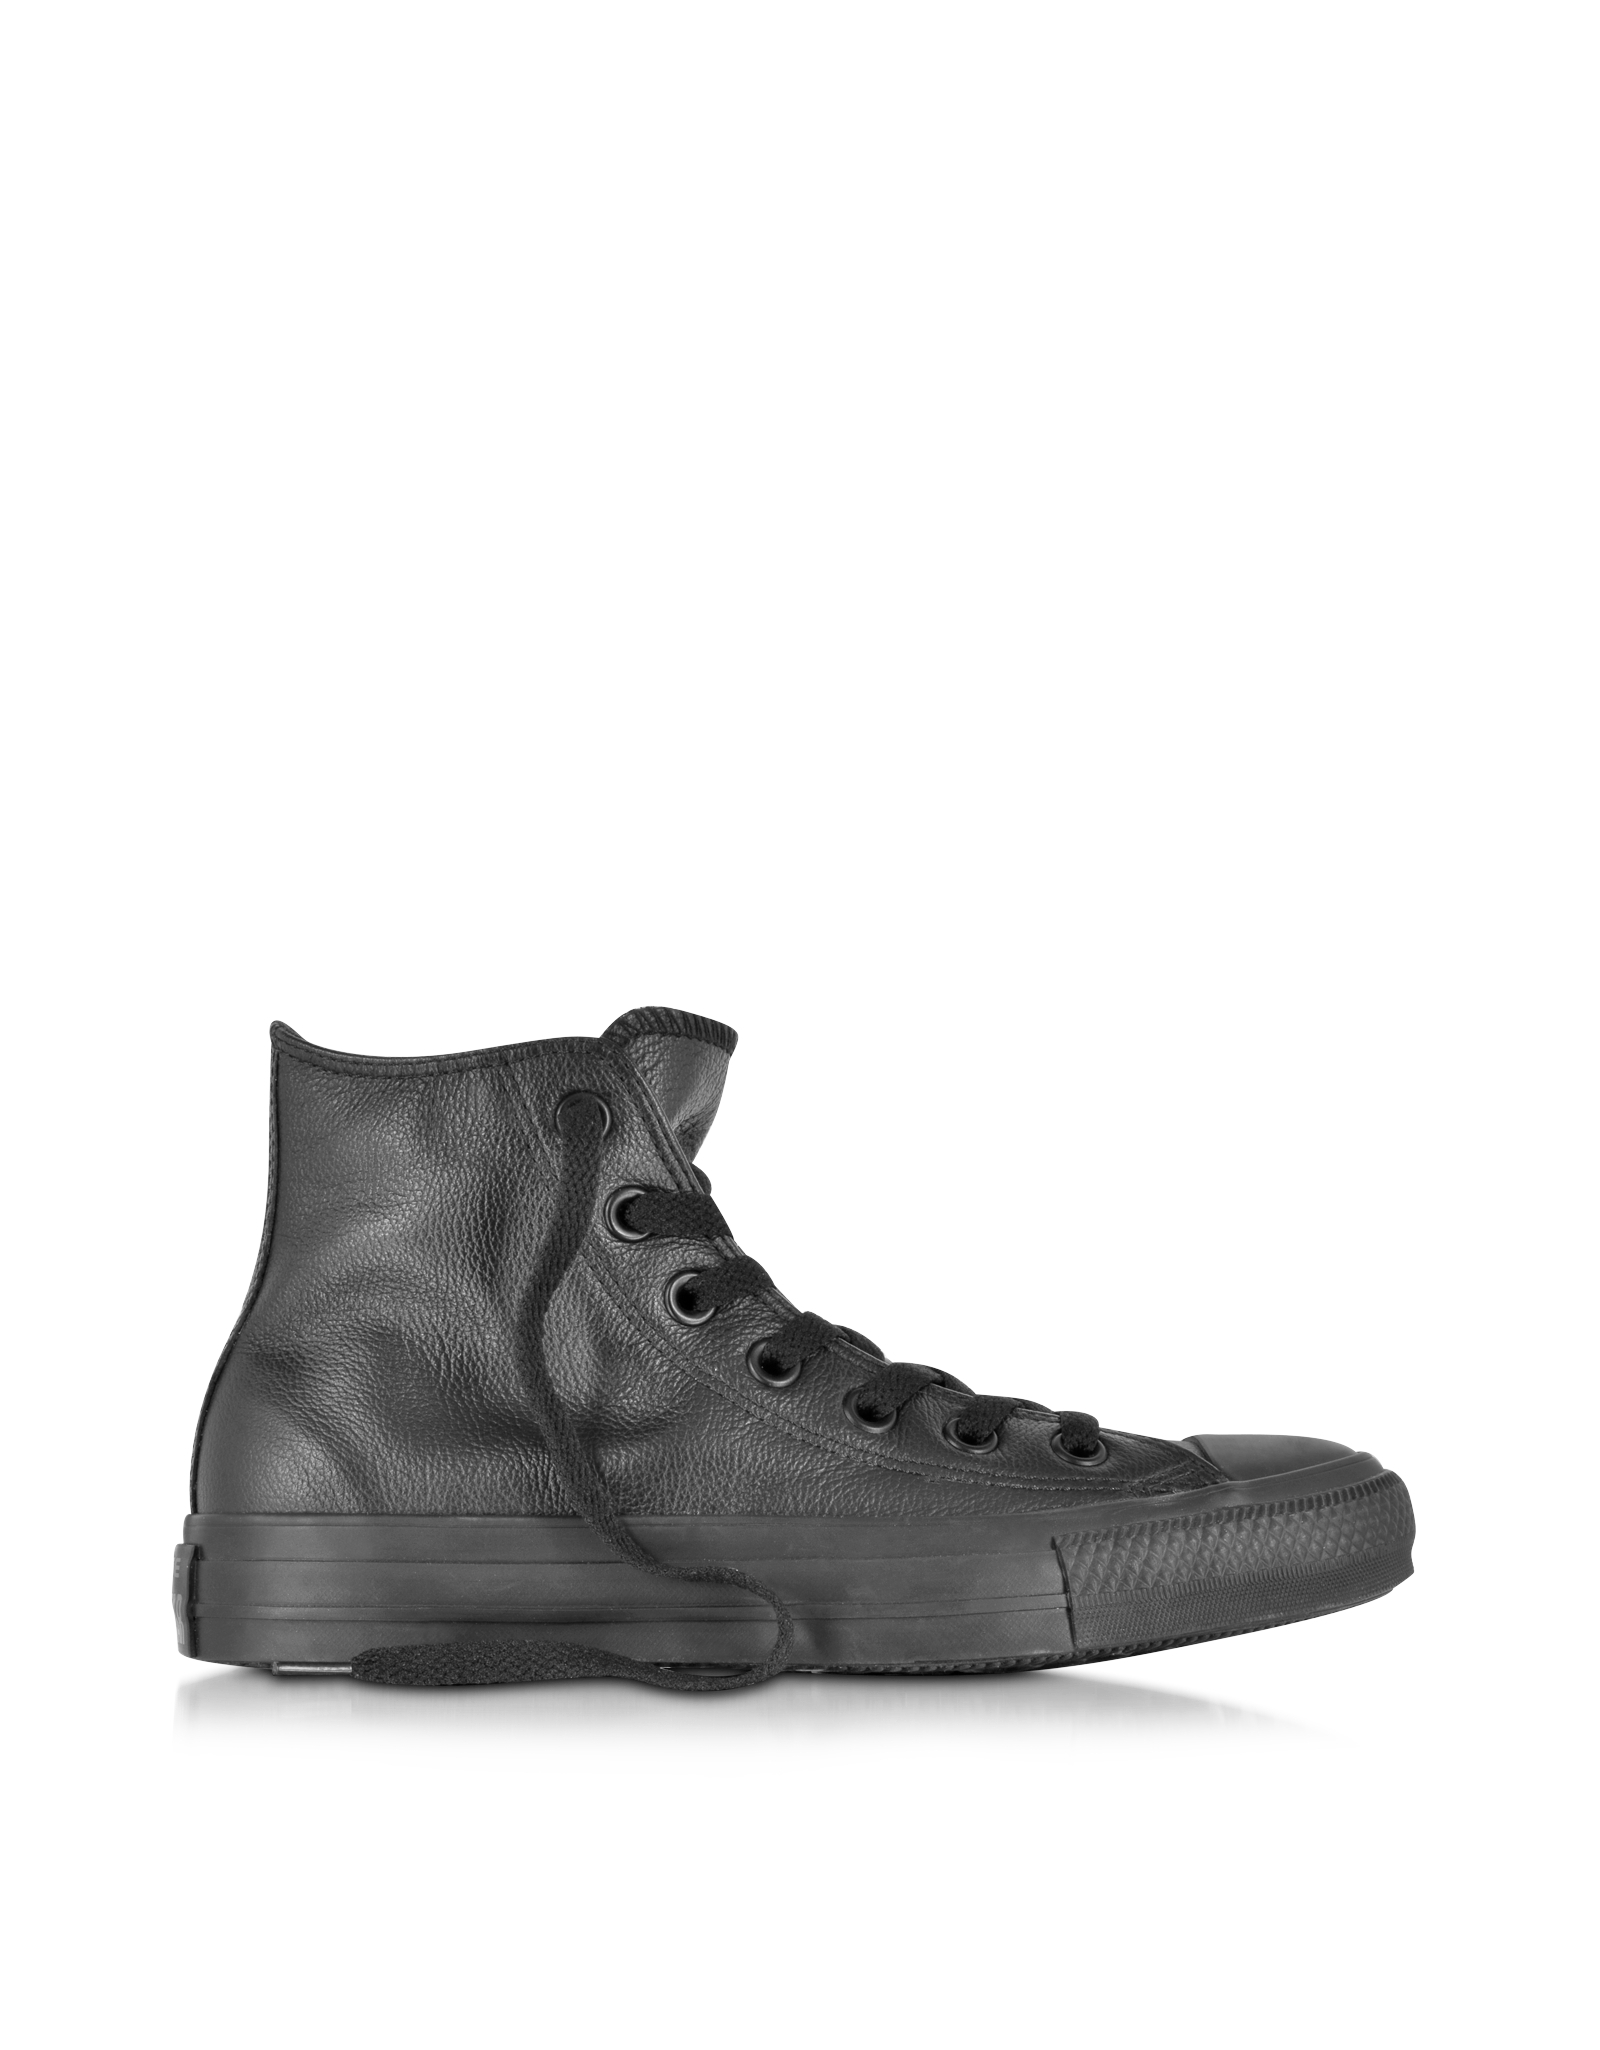 Lyst - Converse All Star Hi Leather High-Top Sneakers in Black